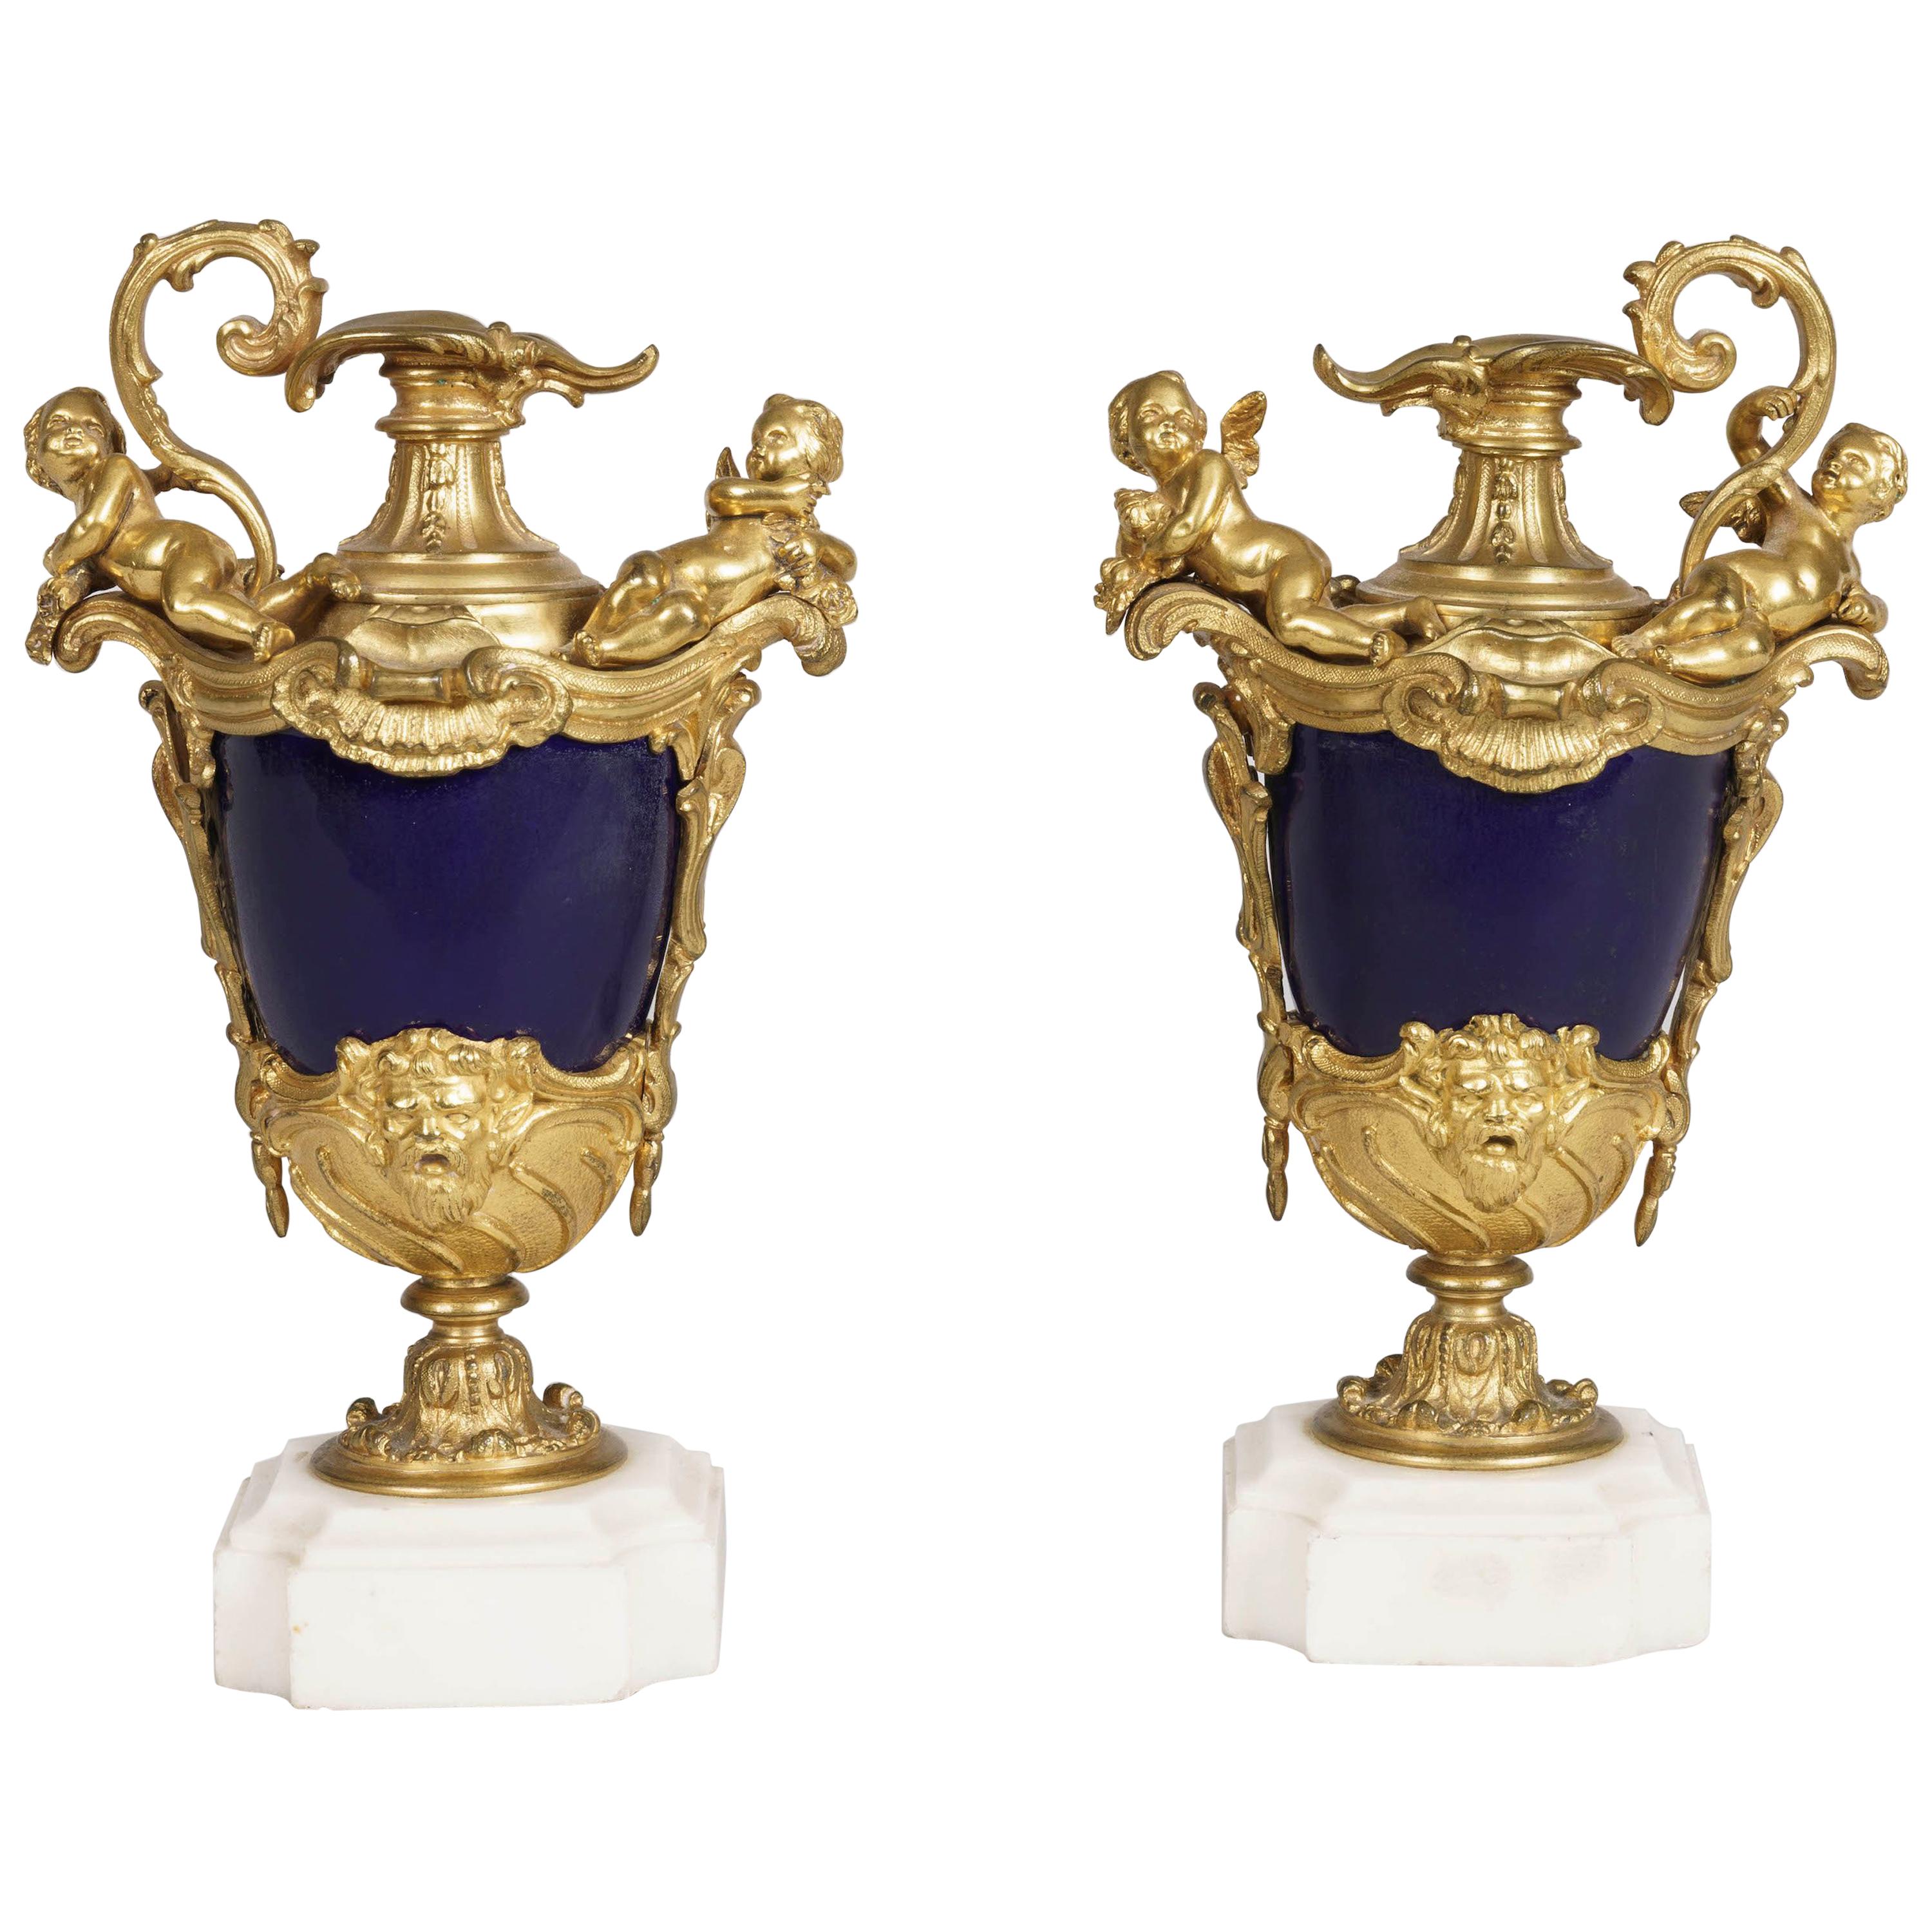 Antique Pair of Decorative Vases in Royal Blue Porcelain and Gilt